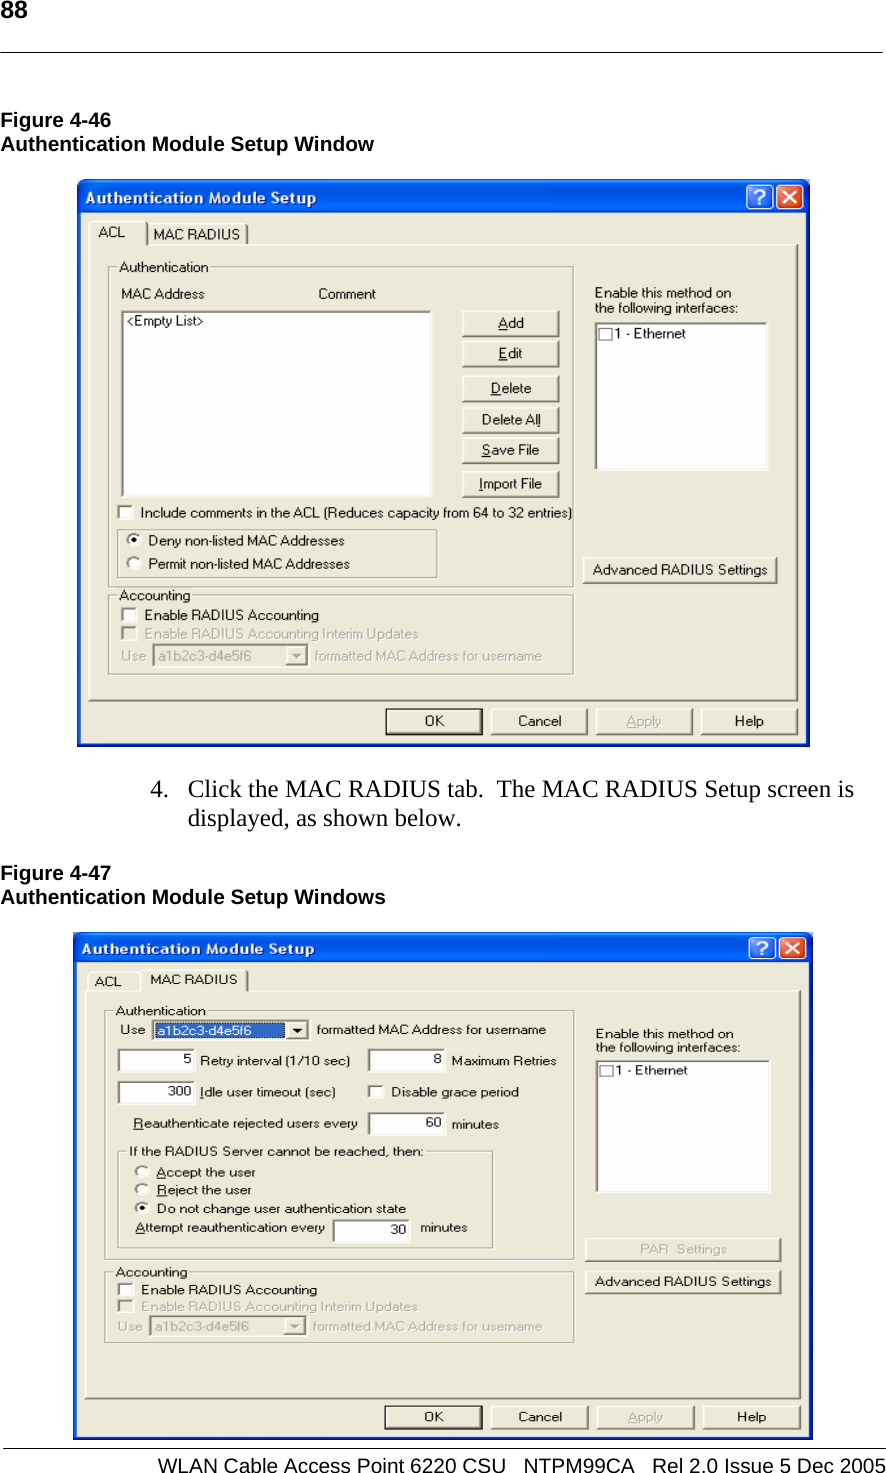   88  WLAN Cable Access Point 6220 CSU   NTPM99CA   Rel 2.0 Issue 5 Dec 2005 Figure 4-46 Authentication Module Setup Window    4. Click the MAC RADIUS tab.  The MAC RADIUS Setup screen is displayed, as shown below.  Figure 4-47 Authentication Module Setup Windows   